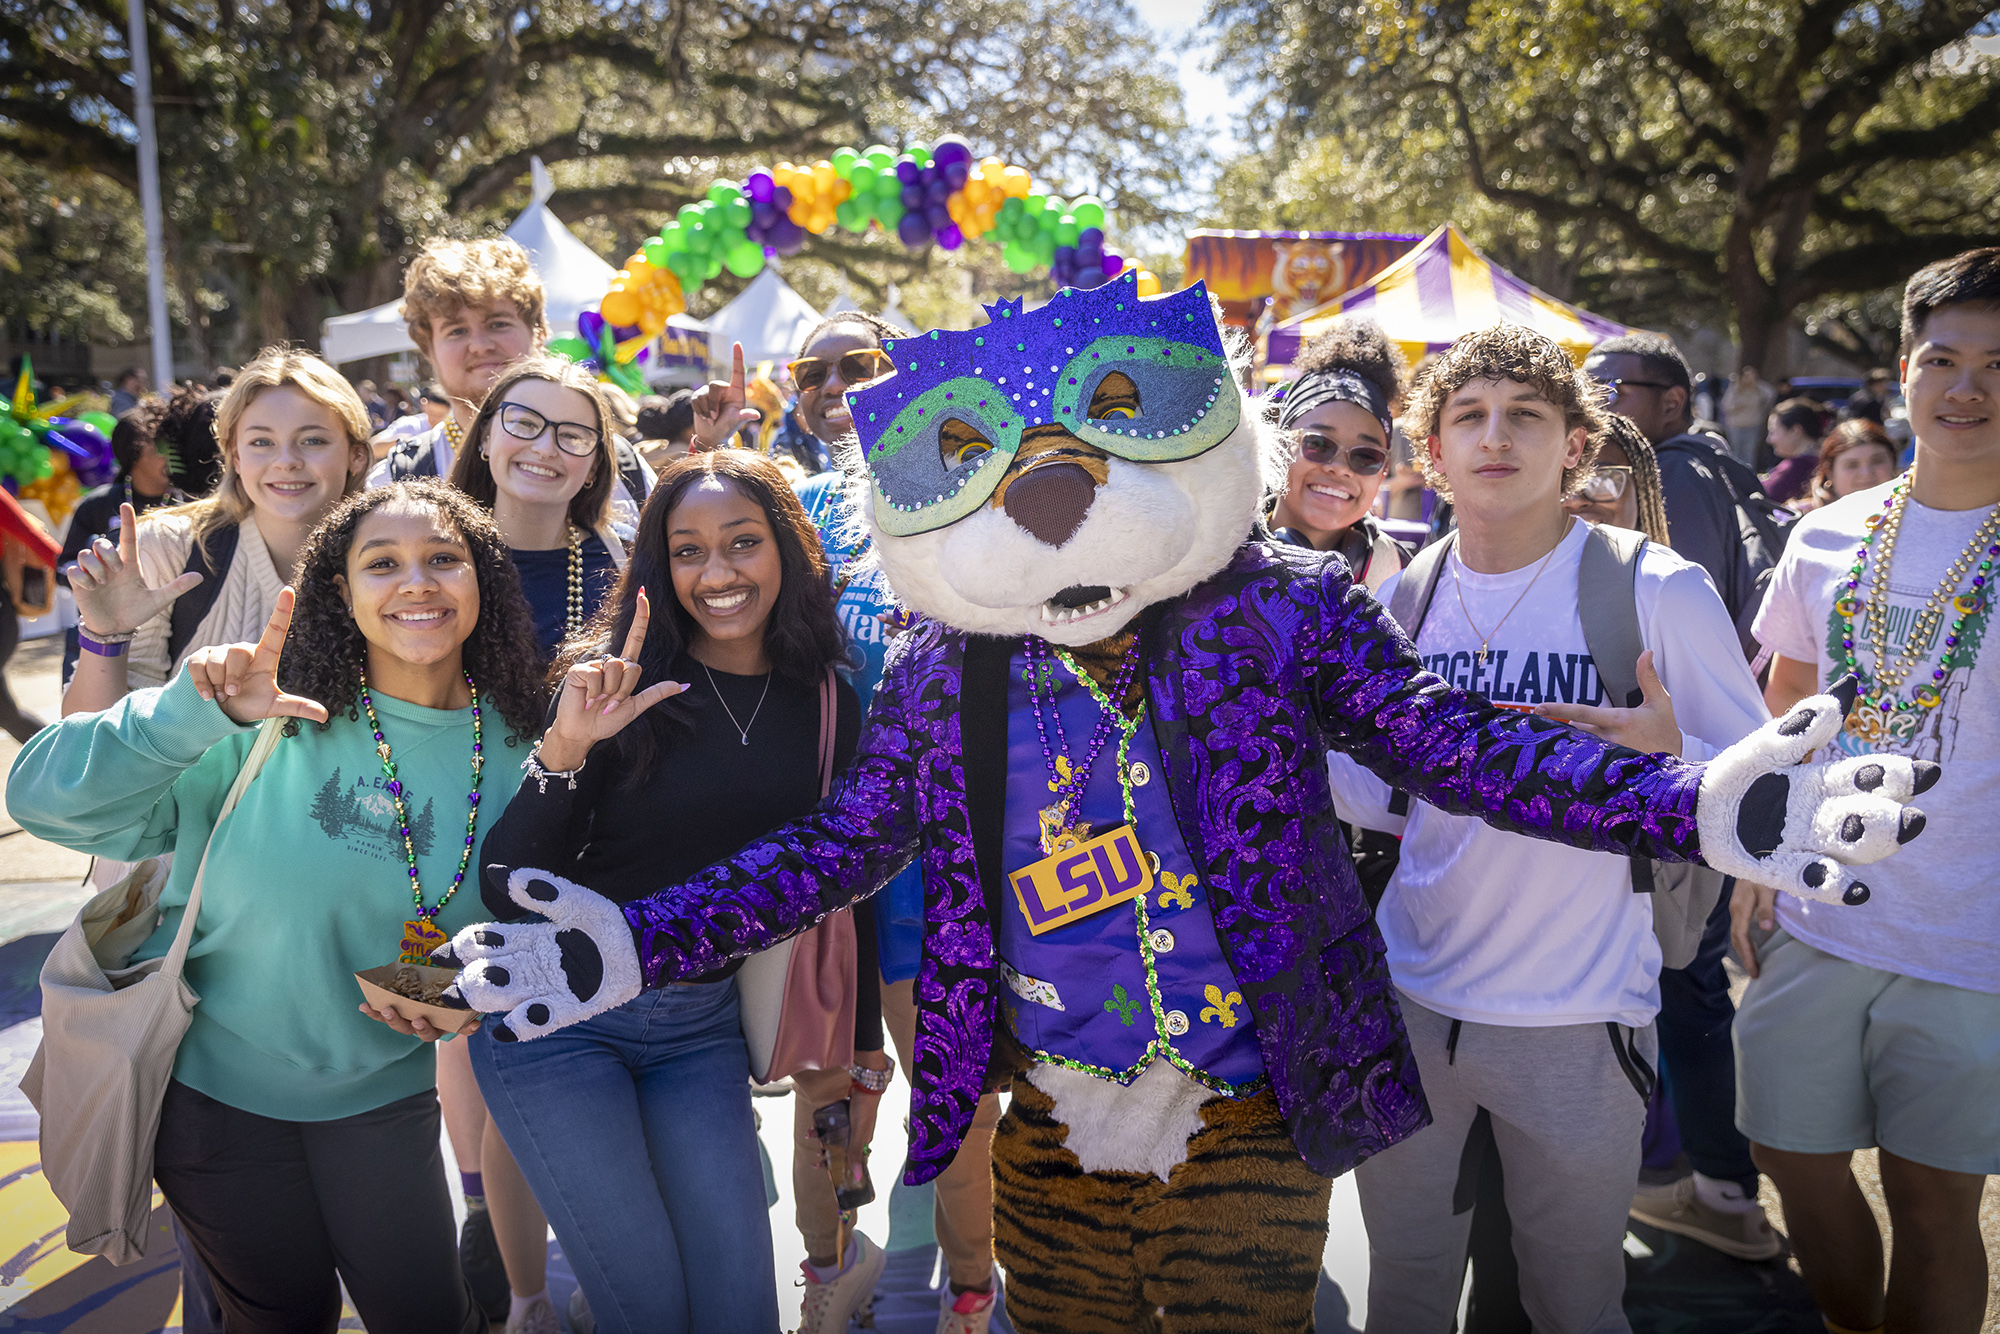 Mike mascot dressed in colorful attire and a Mardi Gras mask poses with students